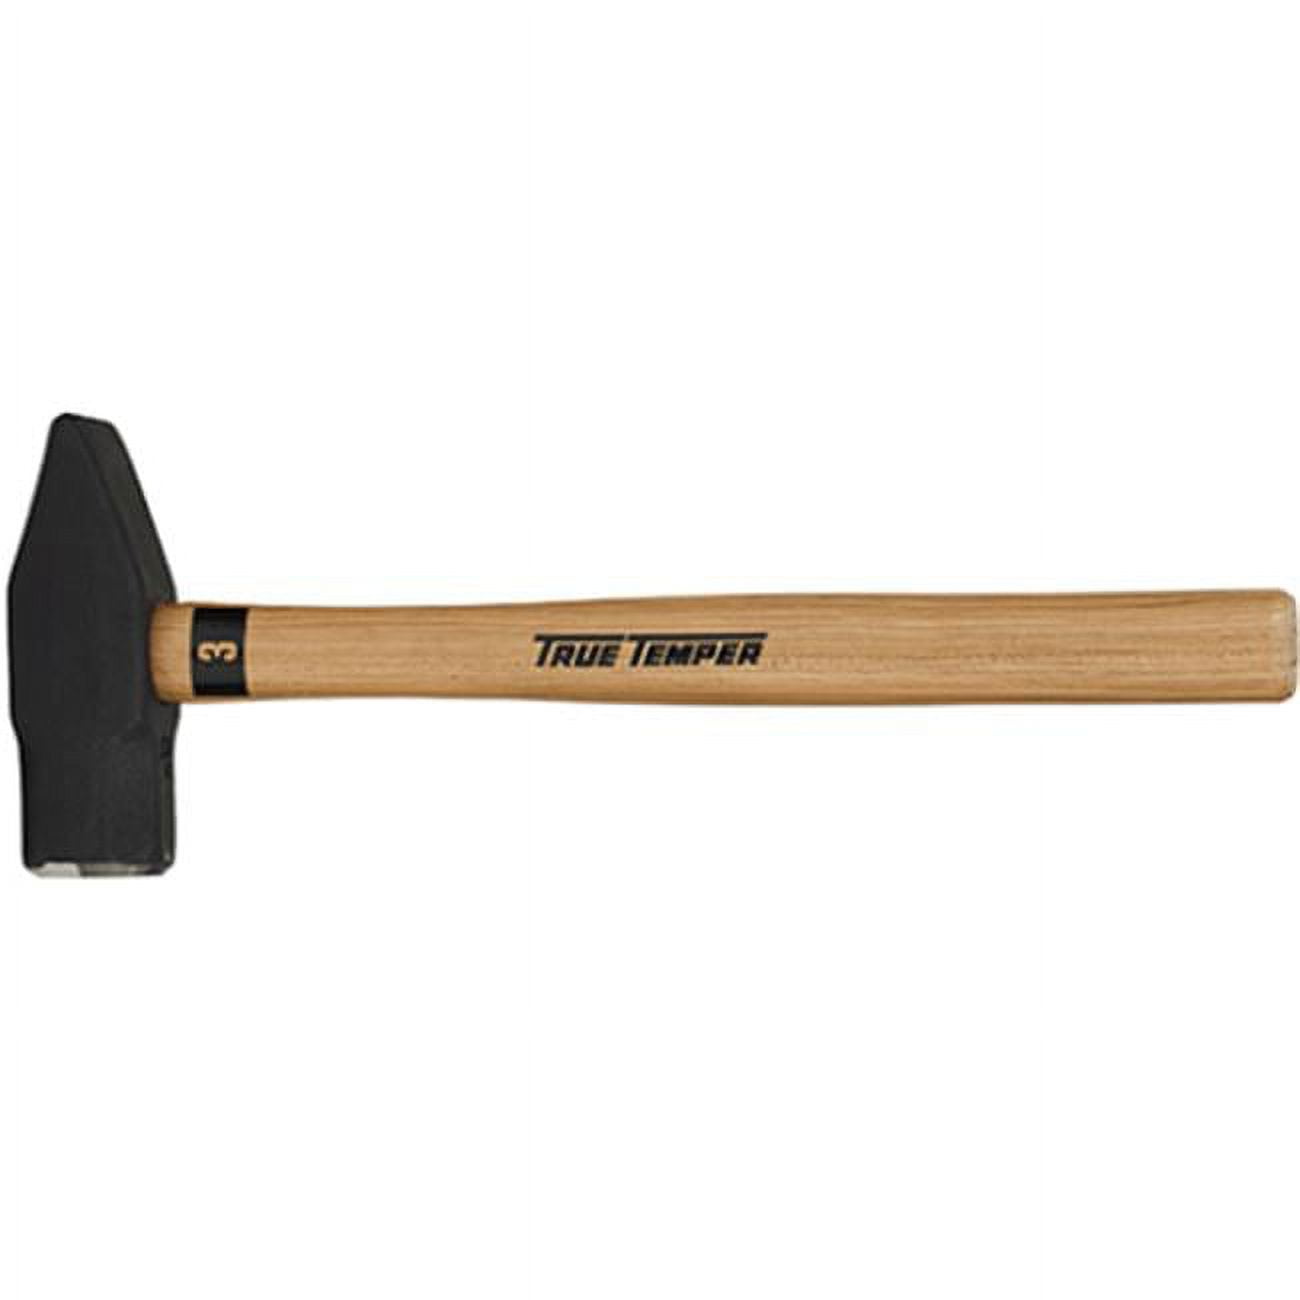 Picture of Ames True Temper 20184400 3 lbs Wood-Handled Sledge Hammer